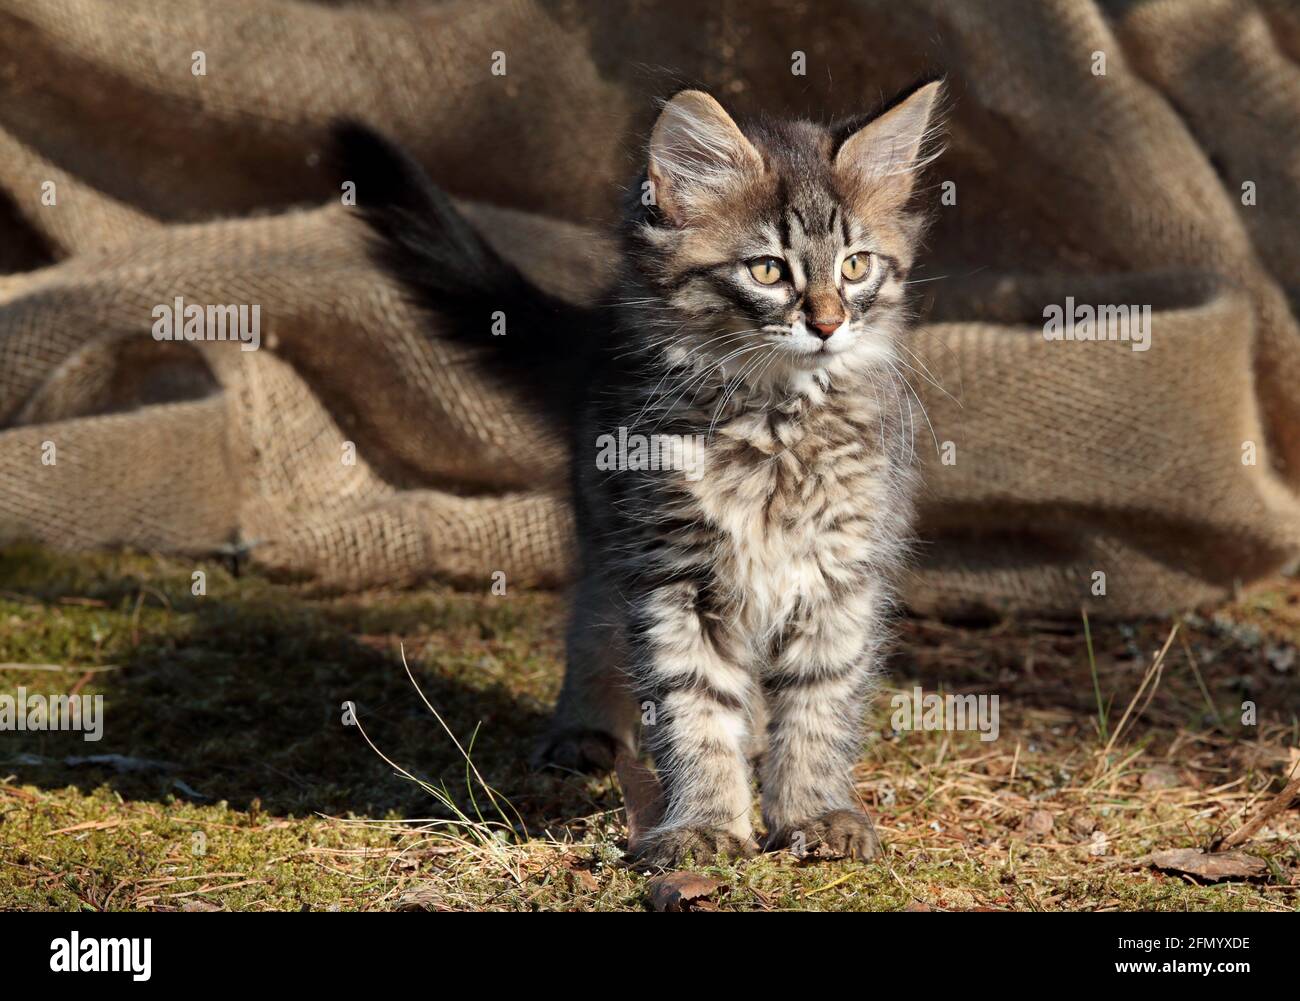 Norwegian Forest Cat Kittens from traditional old lines keeping